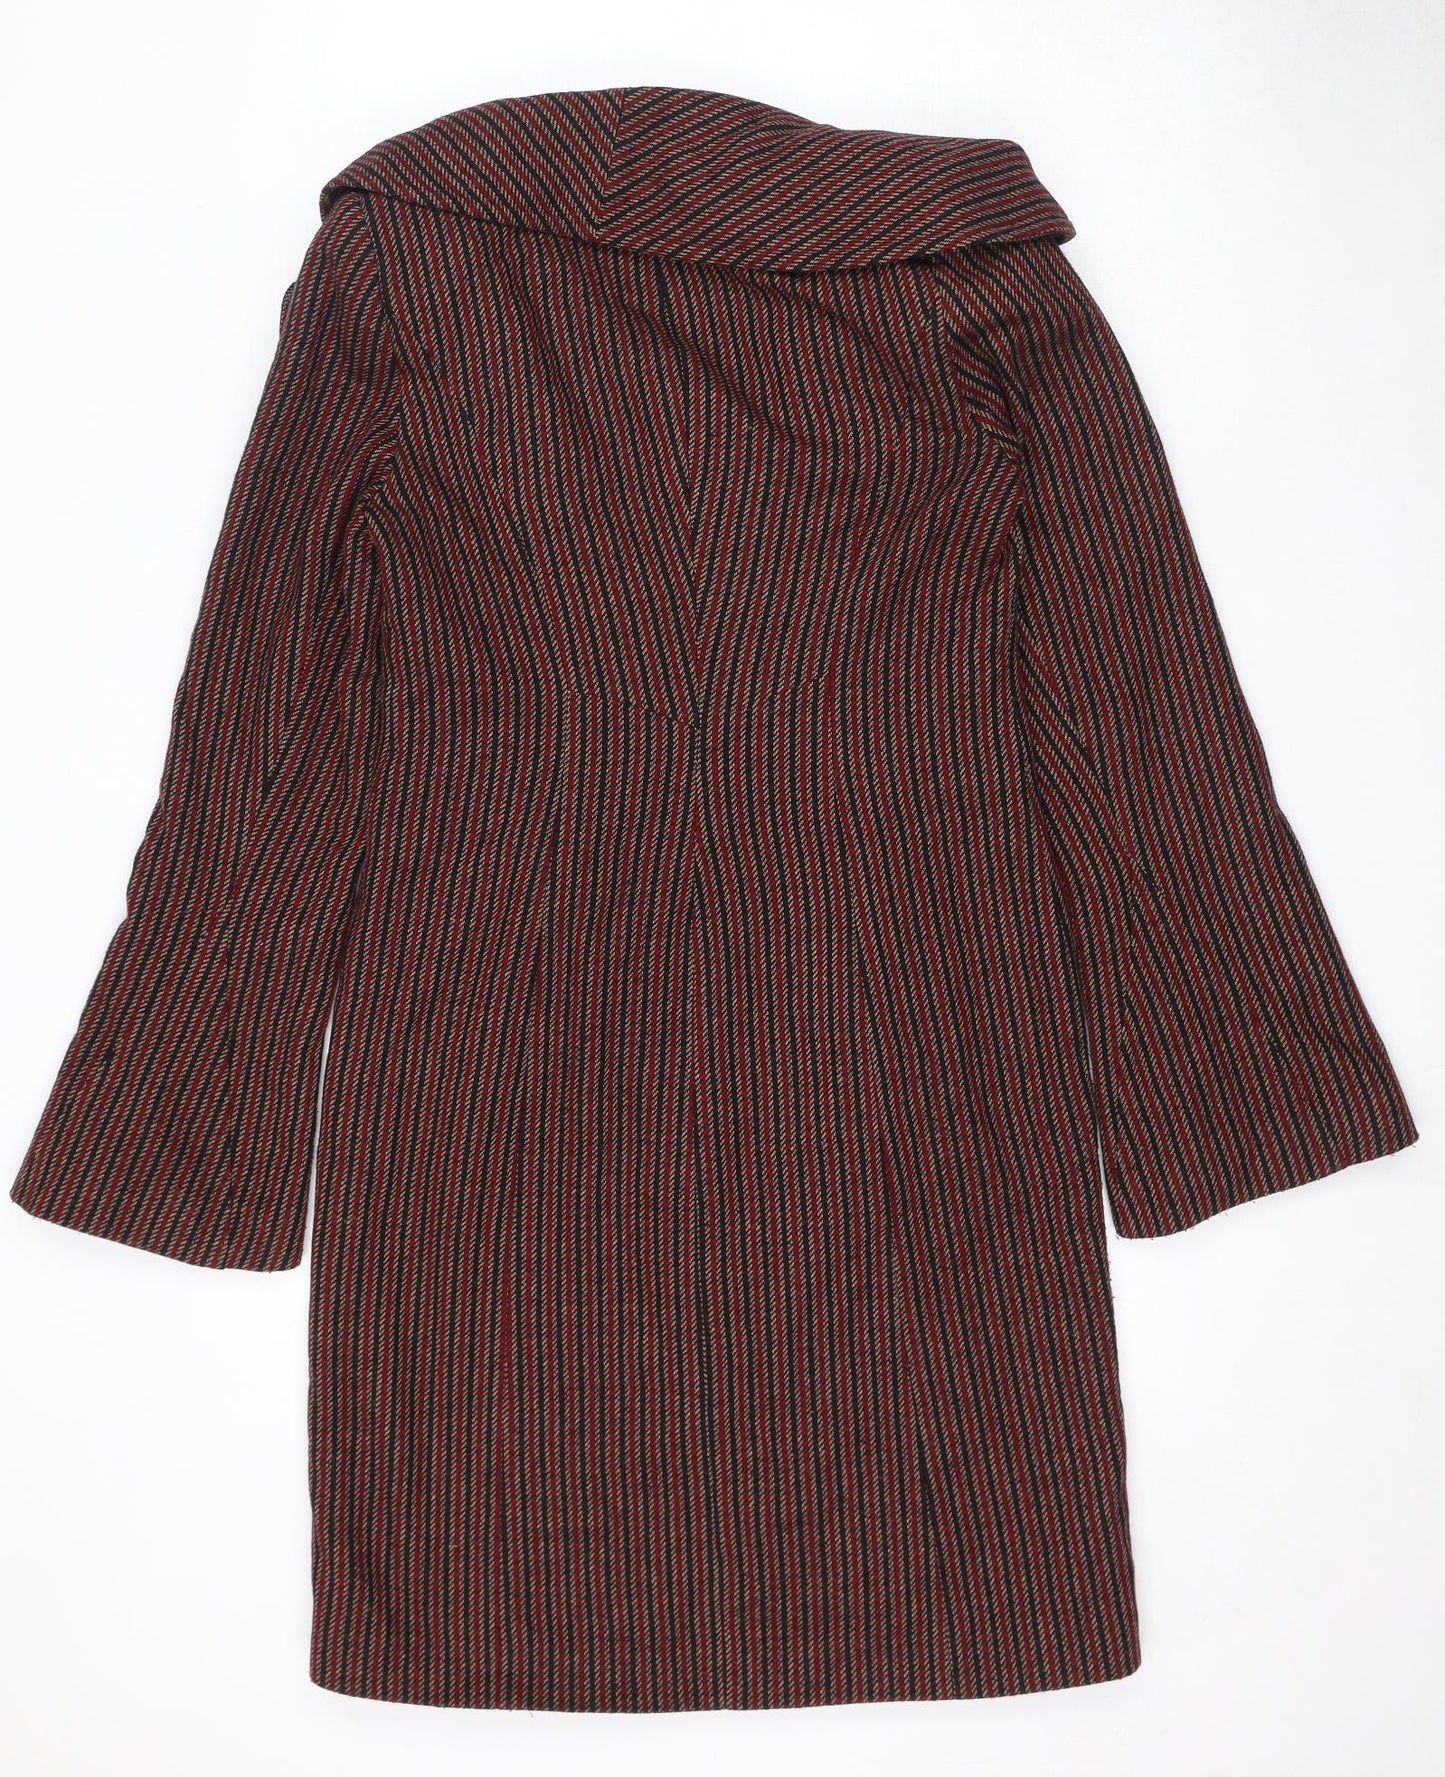 Topshop Womens Red Striped Pea Coat Coat Size 10 Button